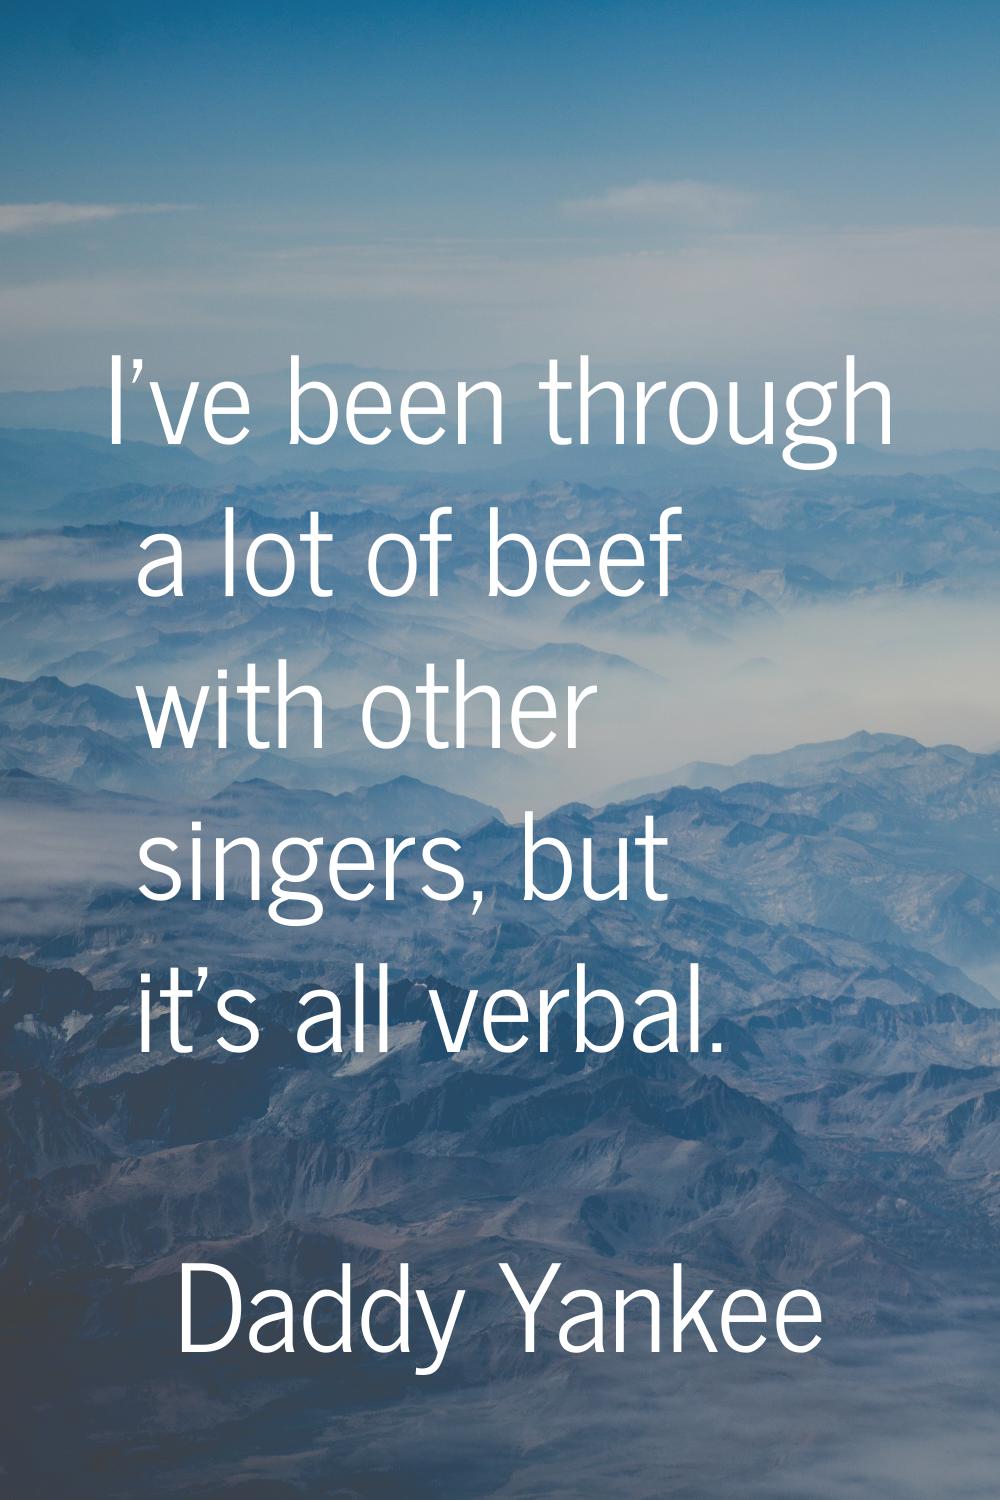 I've been through a lot of beef with other singers, but it's all verbal.